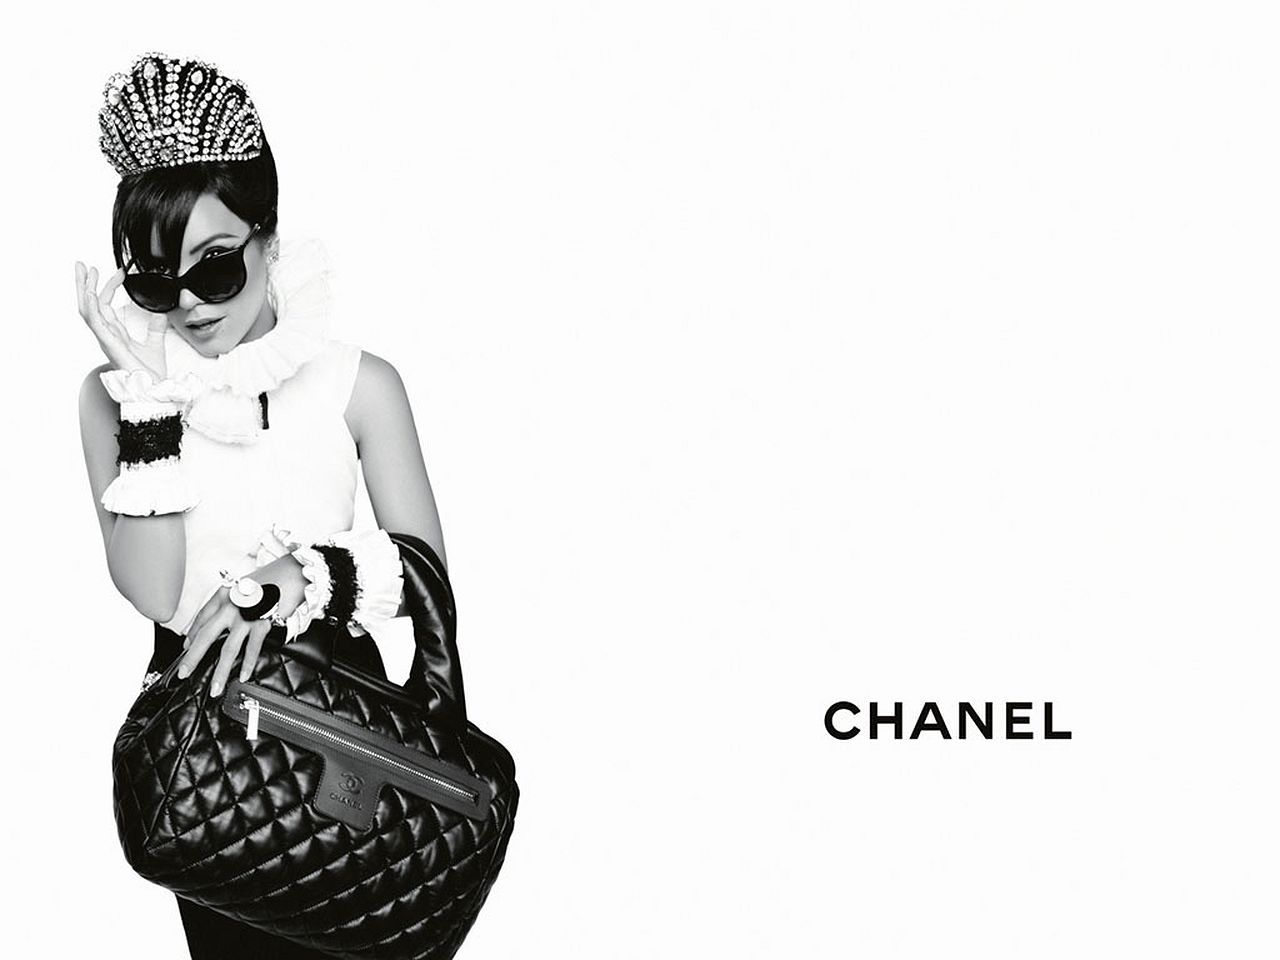 Wallpapers Brands Chanel CHANEL Image #241251 Download